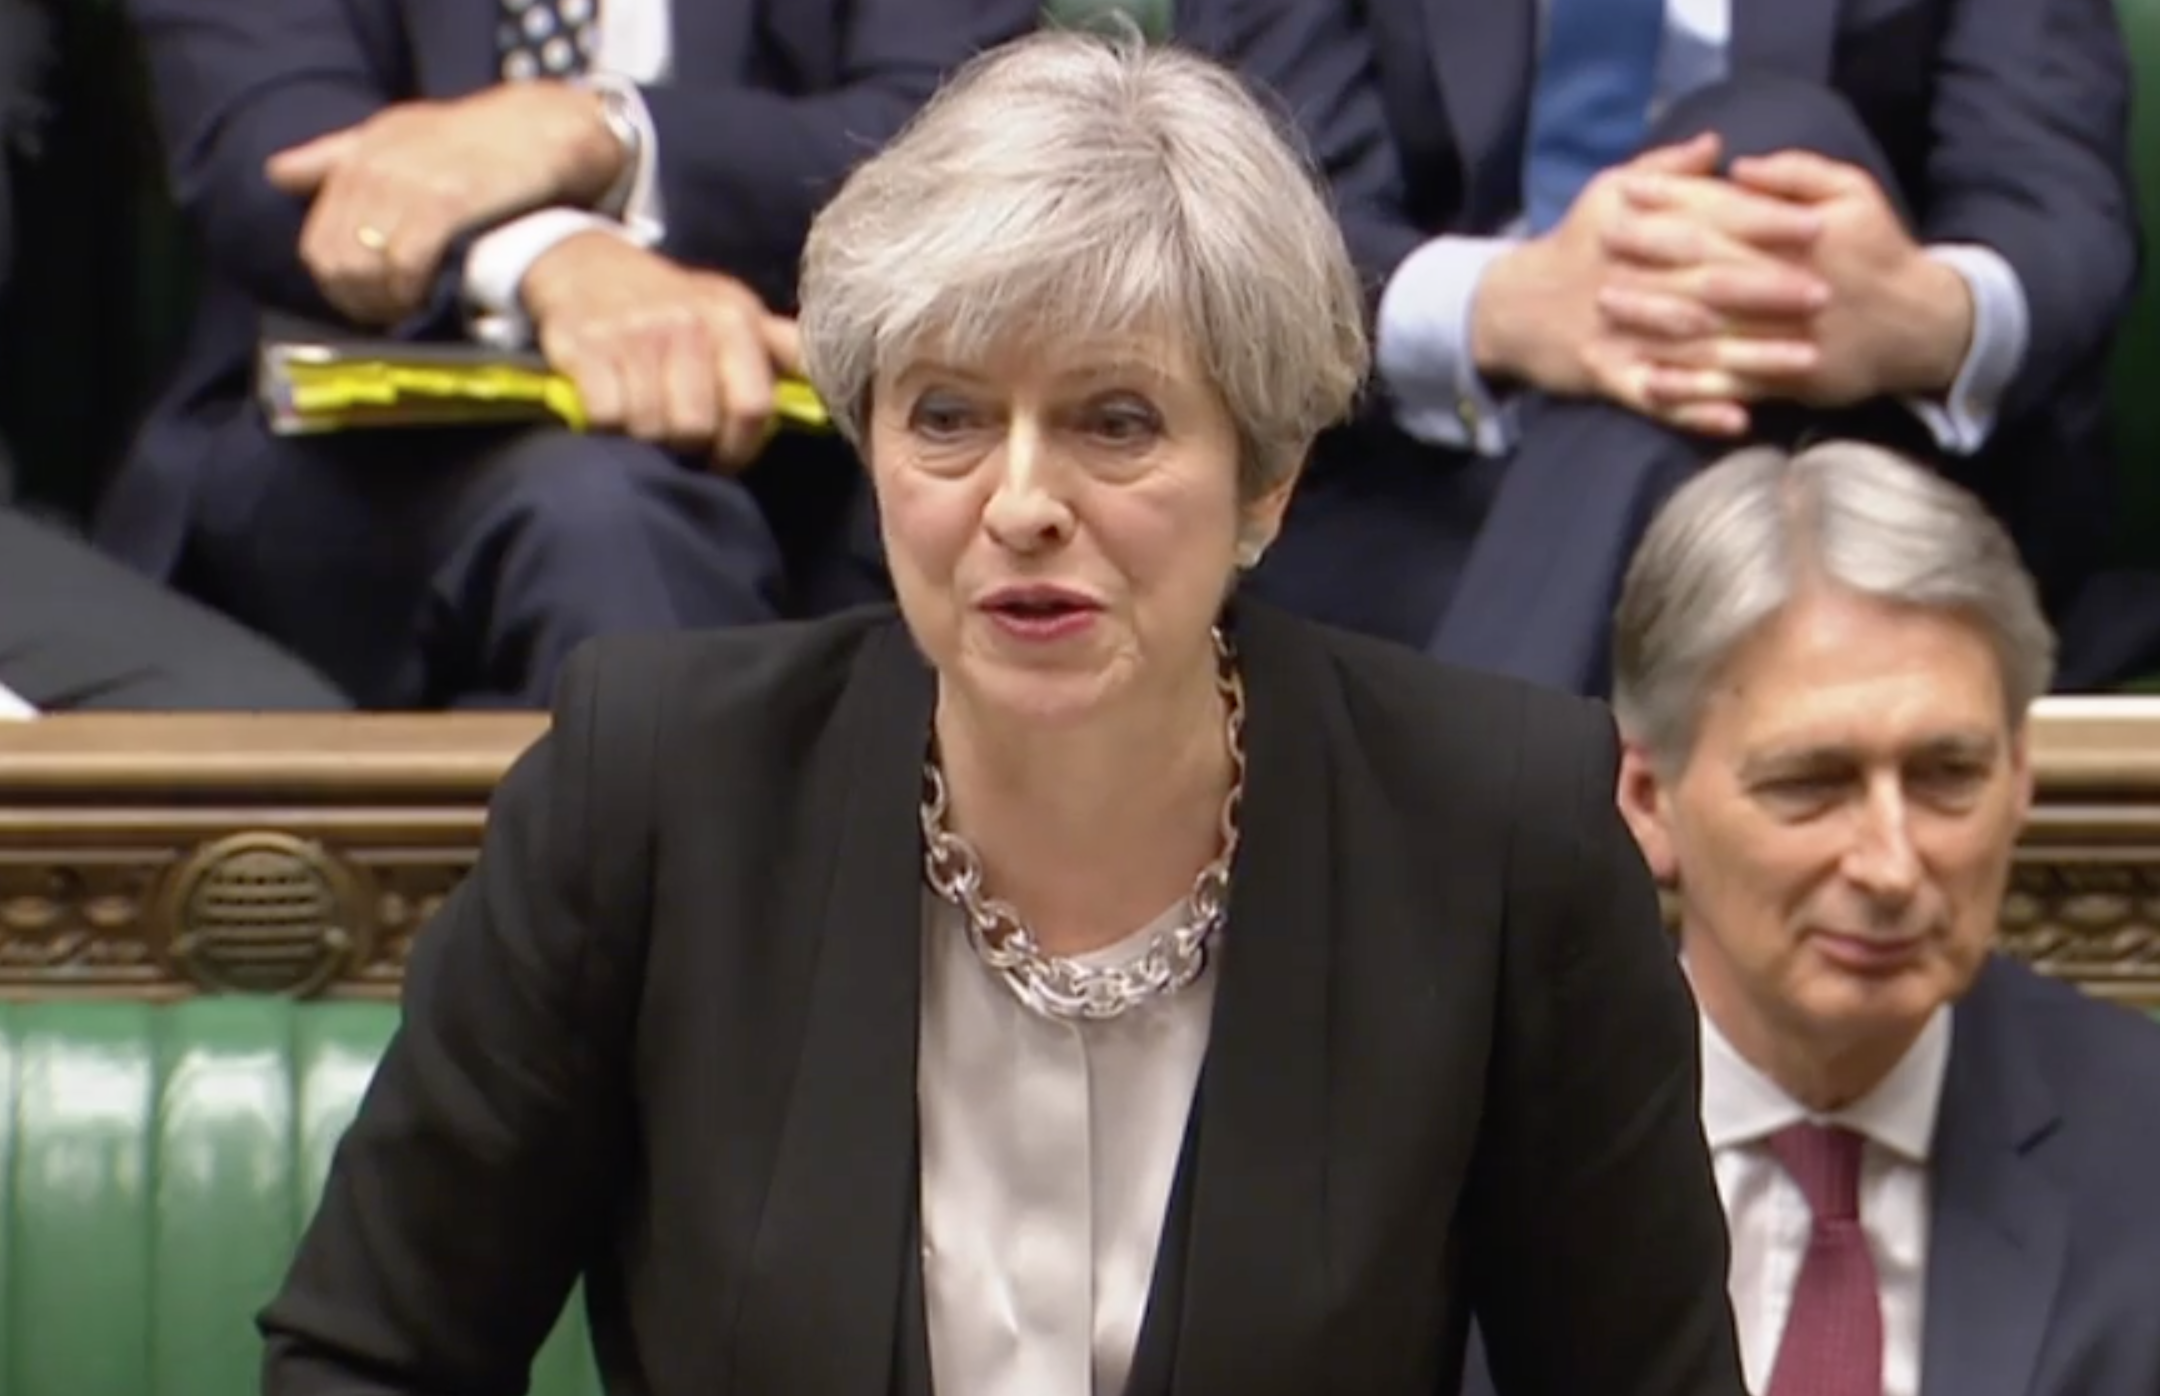 Theresa May bravely faces down the insubordinate commons as it agreed to her election by 522 votes to 13